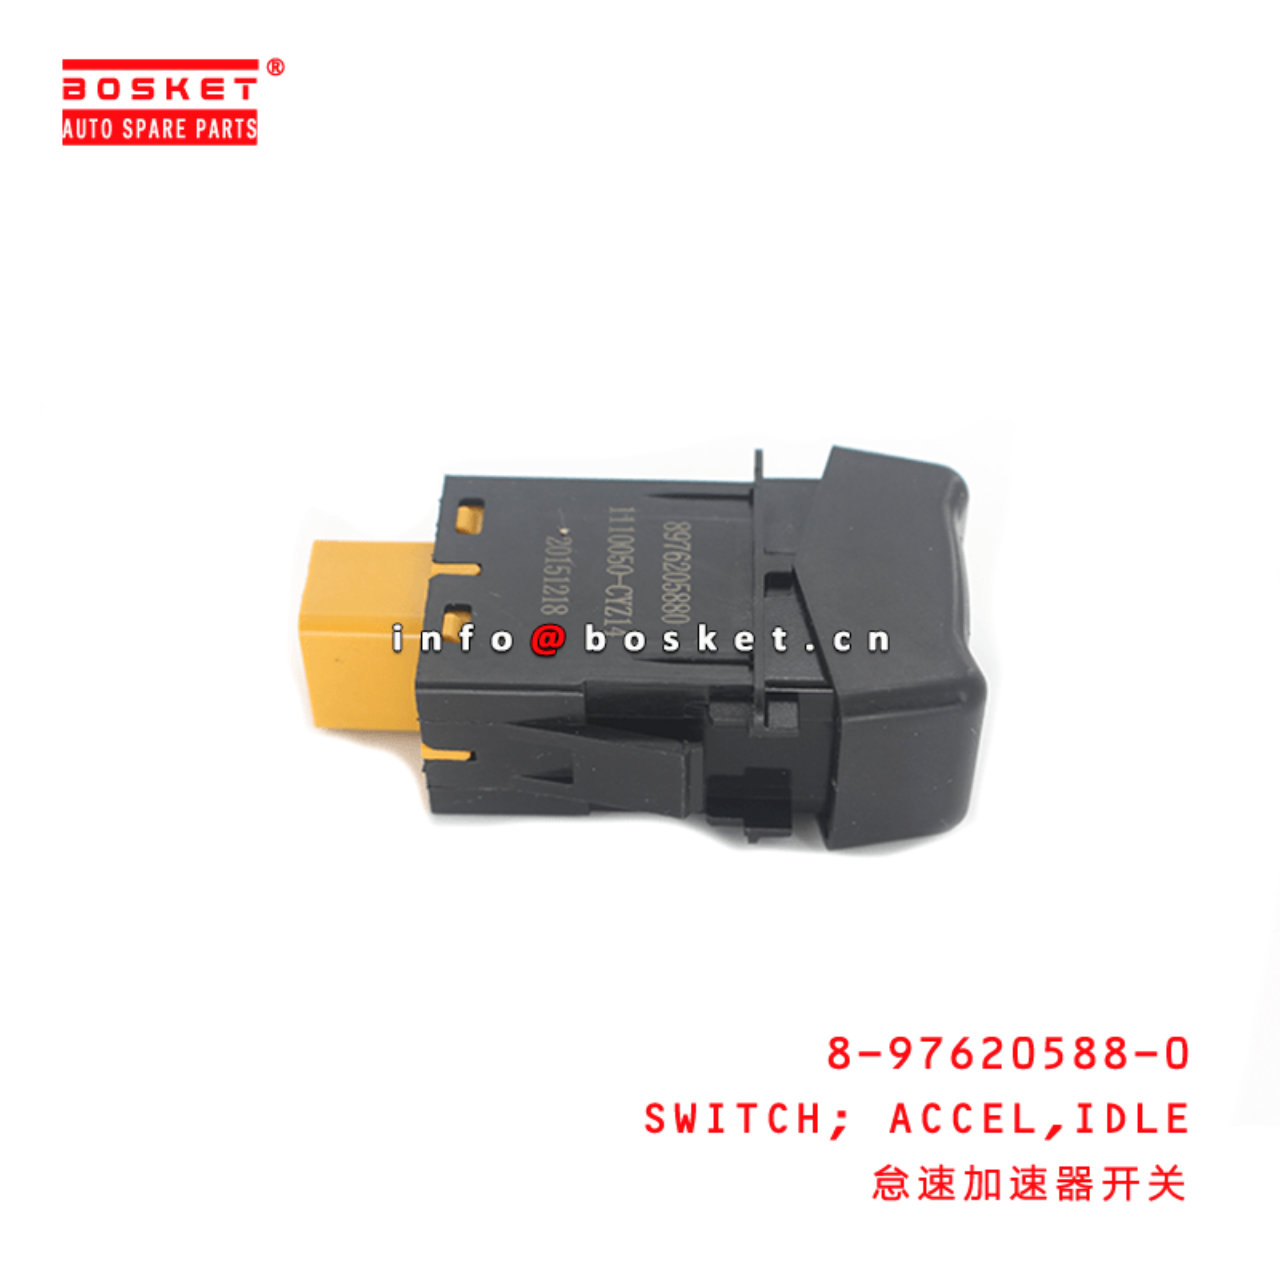 8-97620588-0 Idle Accelerator Switch 8976205880 Suitable for ISUZU VC46